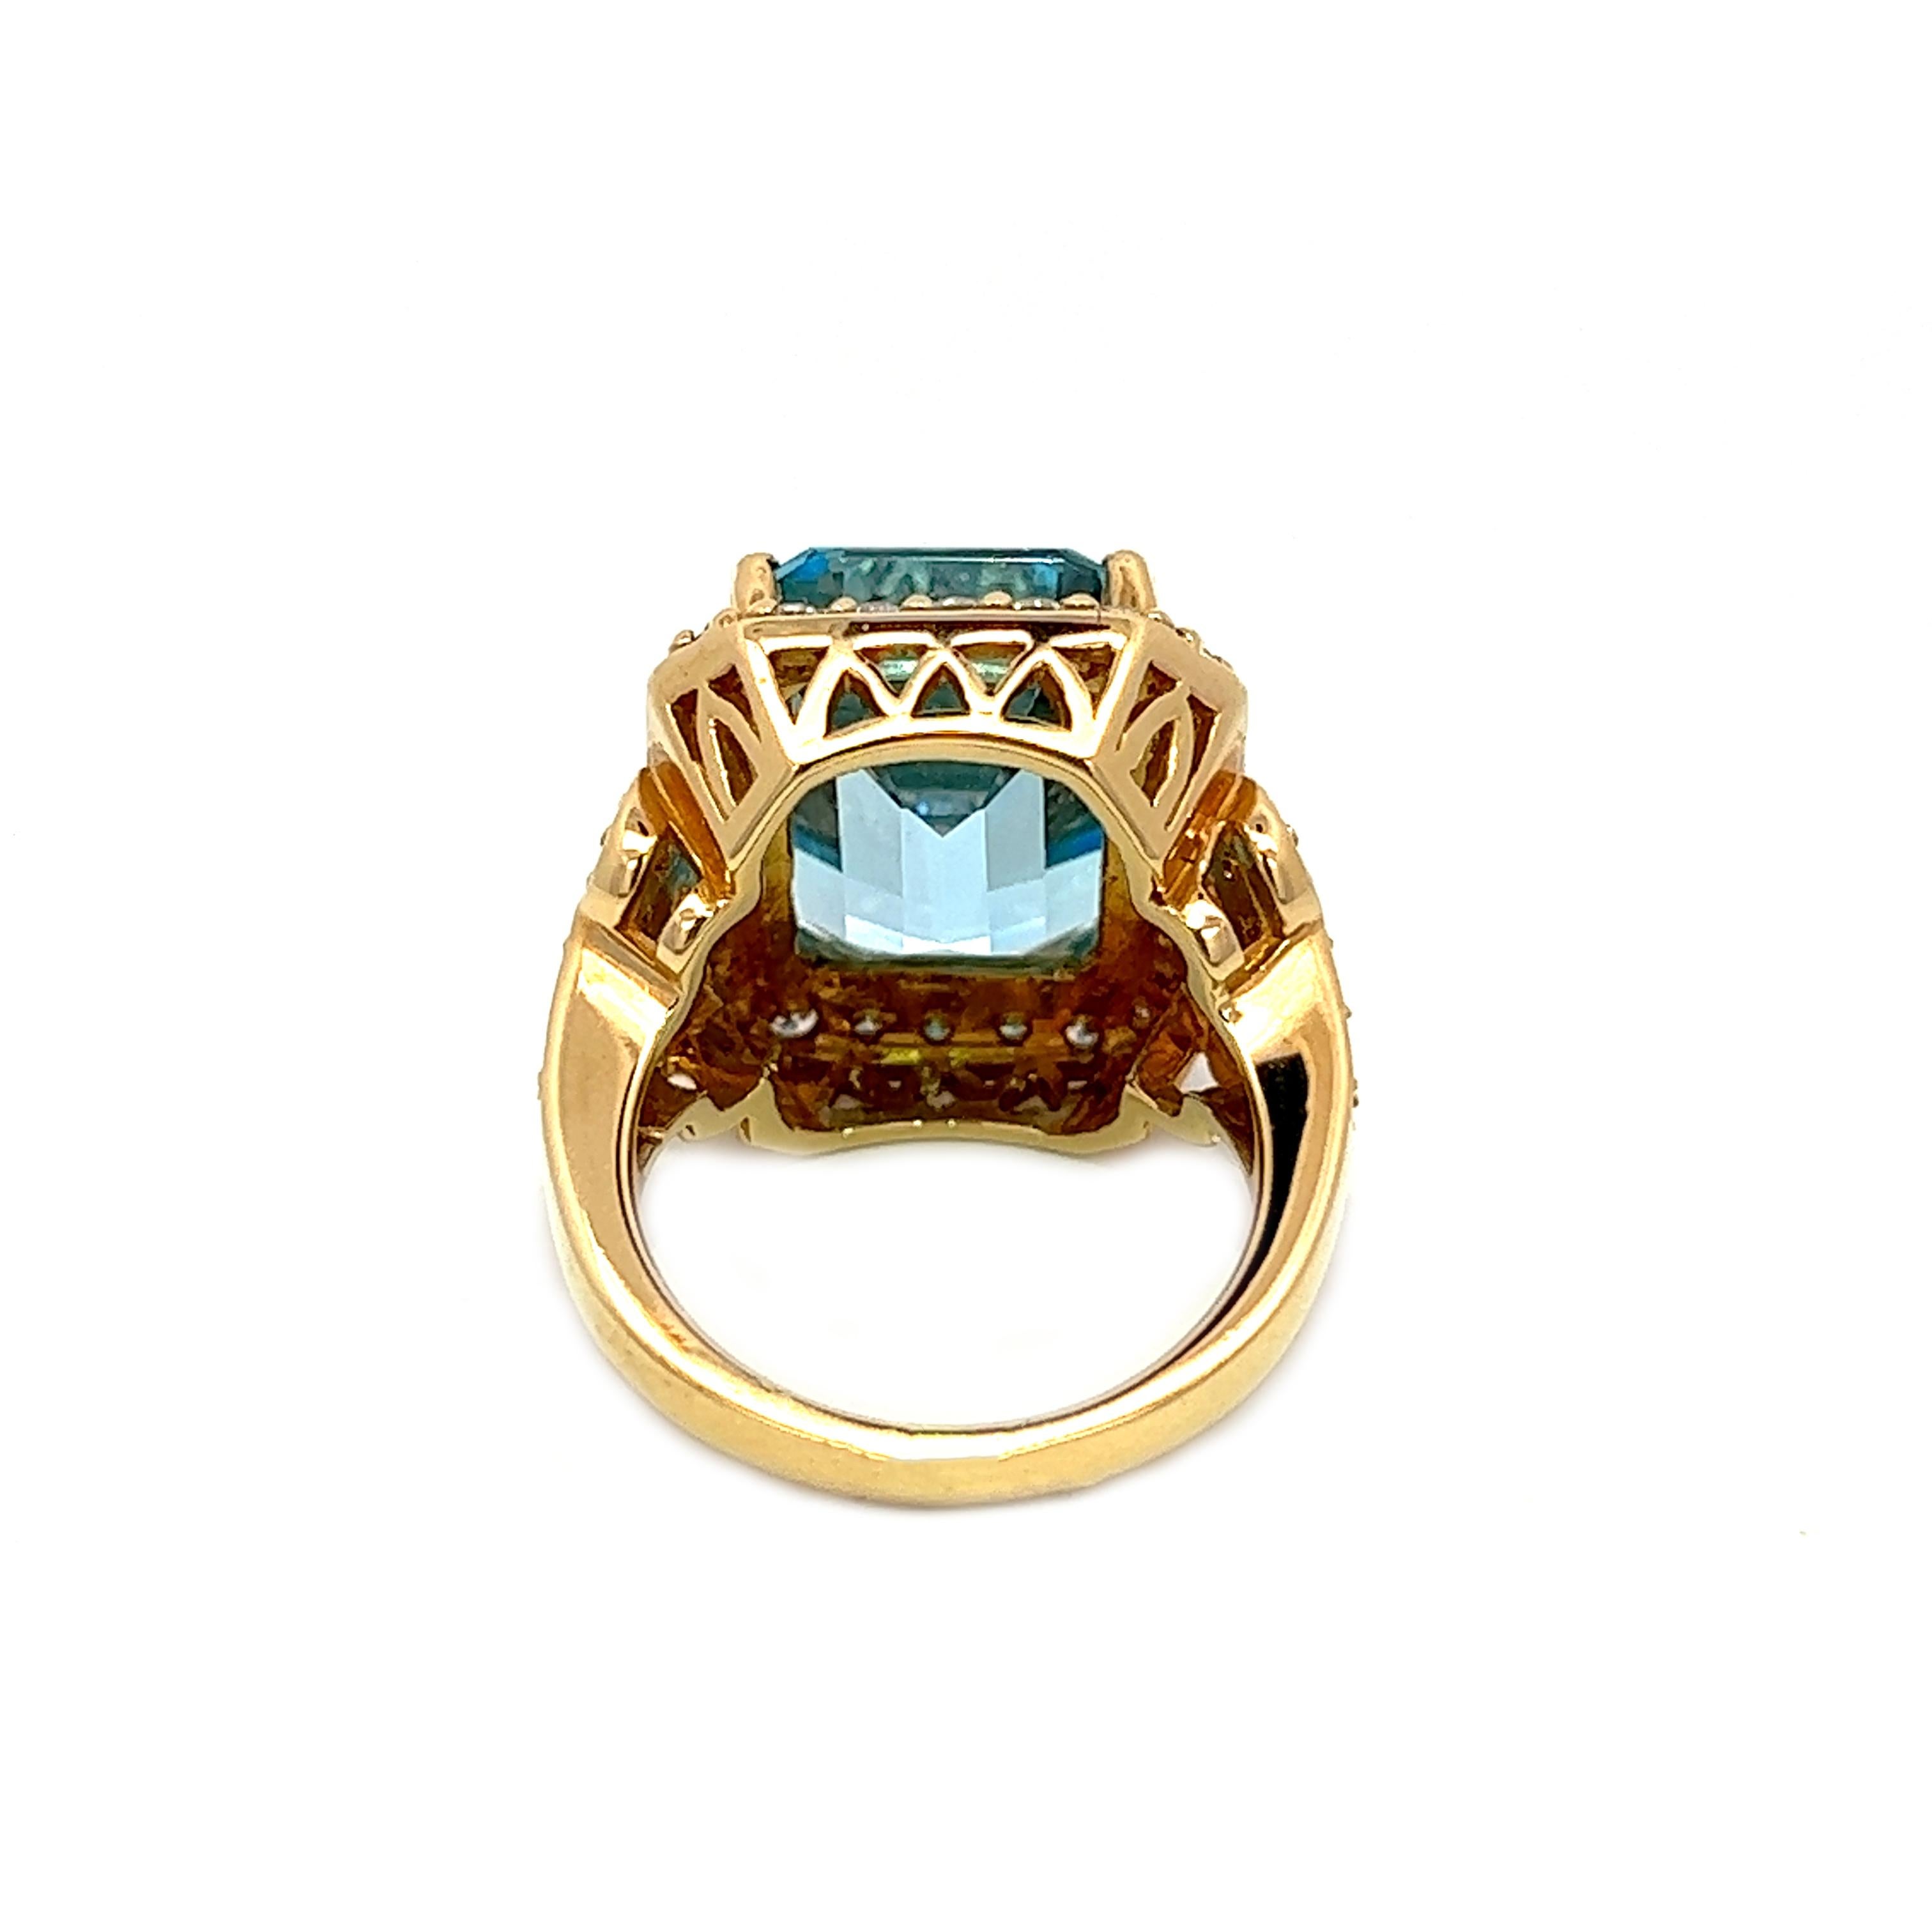 15.07CT Total Weight Blue Topaz & Diamonds Set in 14KY In New Condition For Sale In New York, NY